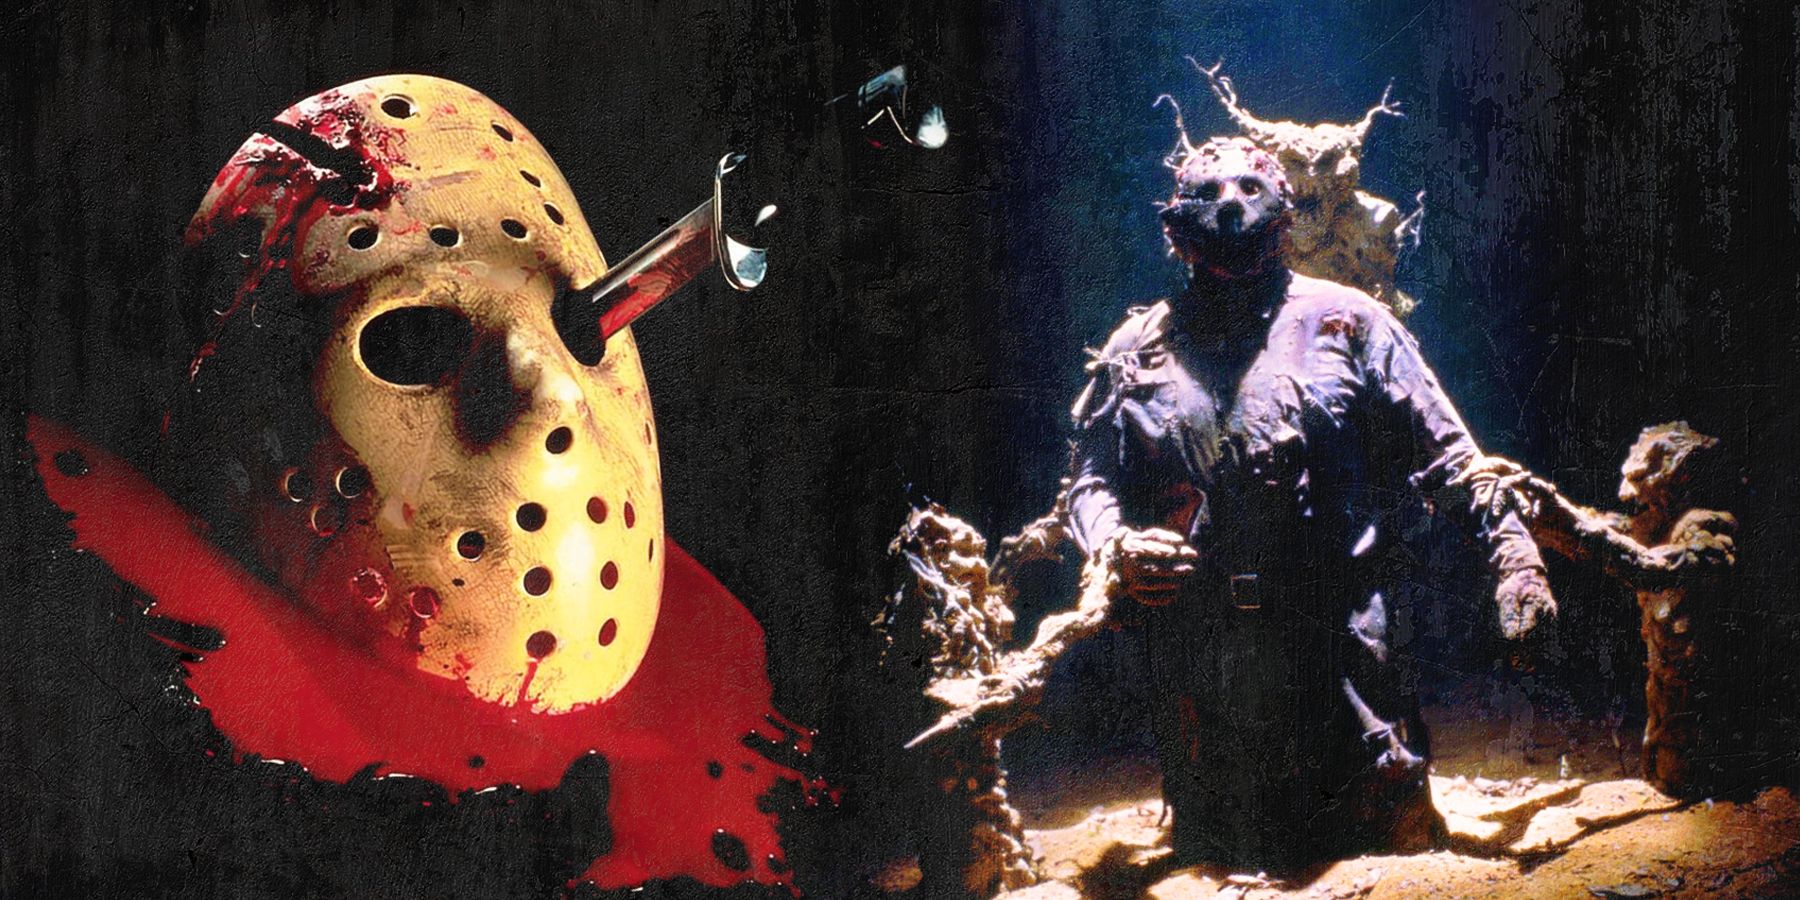 On the left, the mask of Jason from 'Friday the 13th: the Final Chapter' drips with red. On the right, Jason as seen in 'Jason Goes To Hell: The Final Friday'.